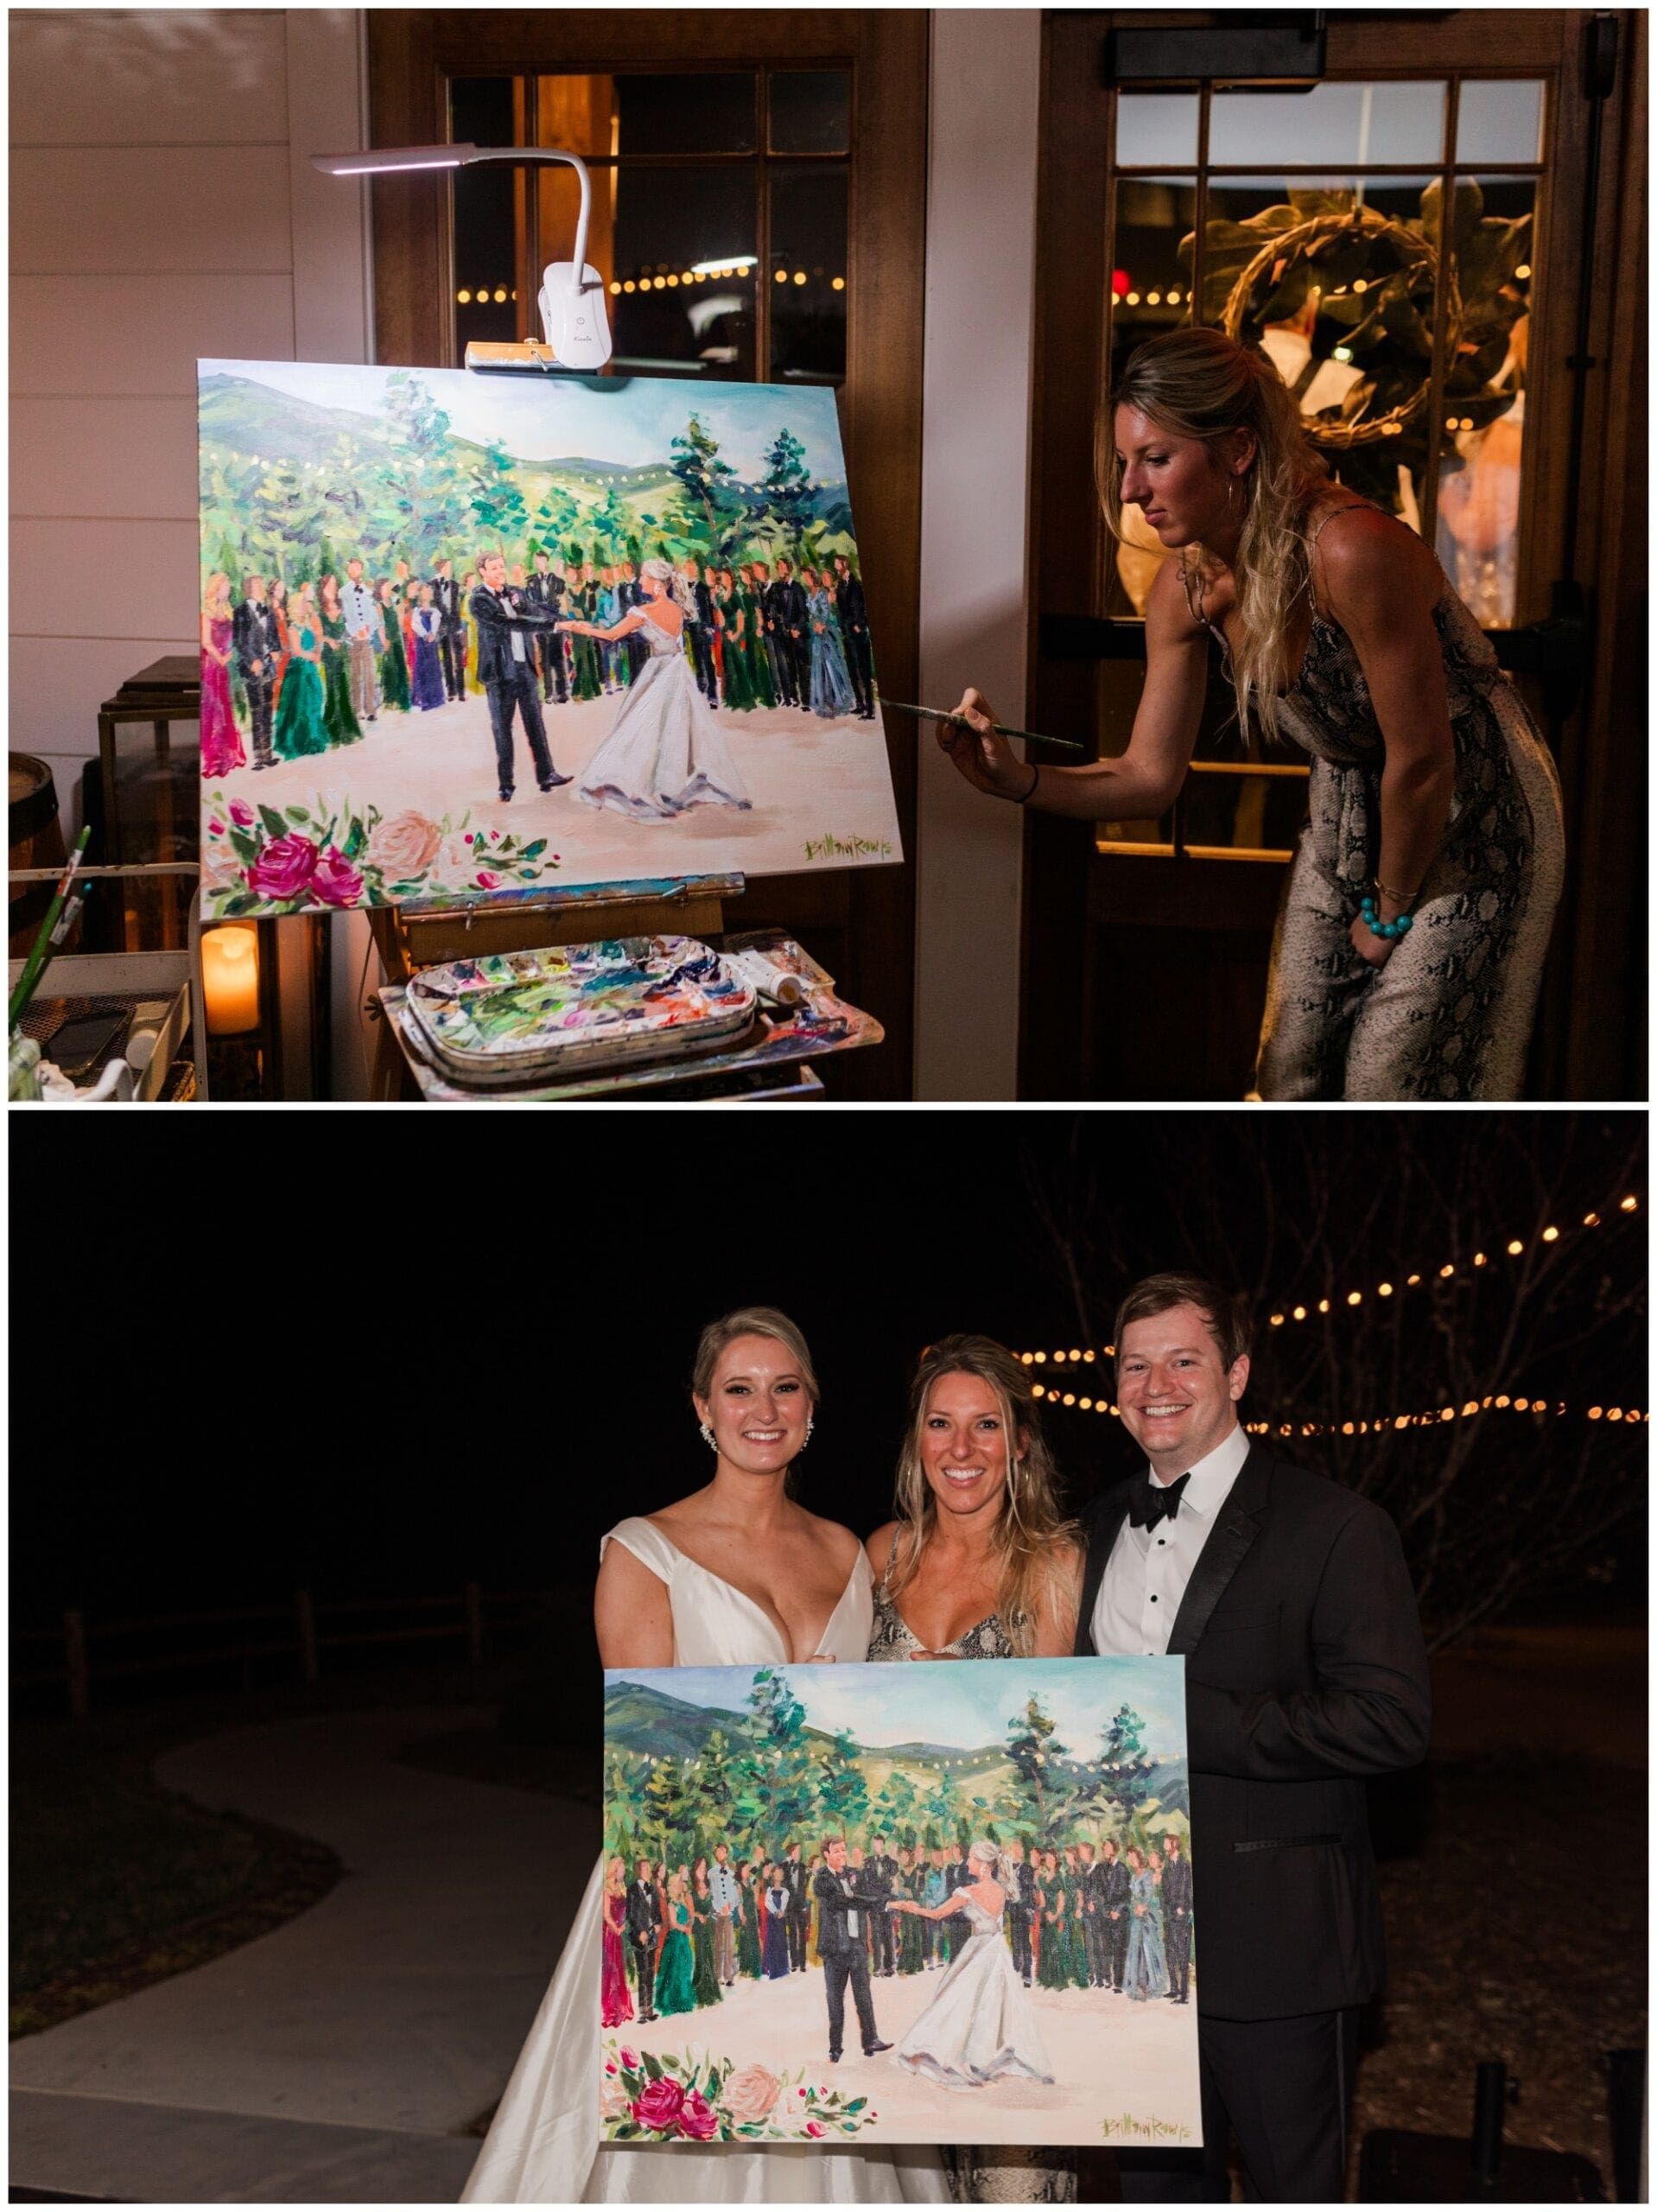 Live painting of first dance at wedding